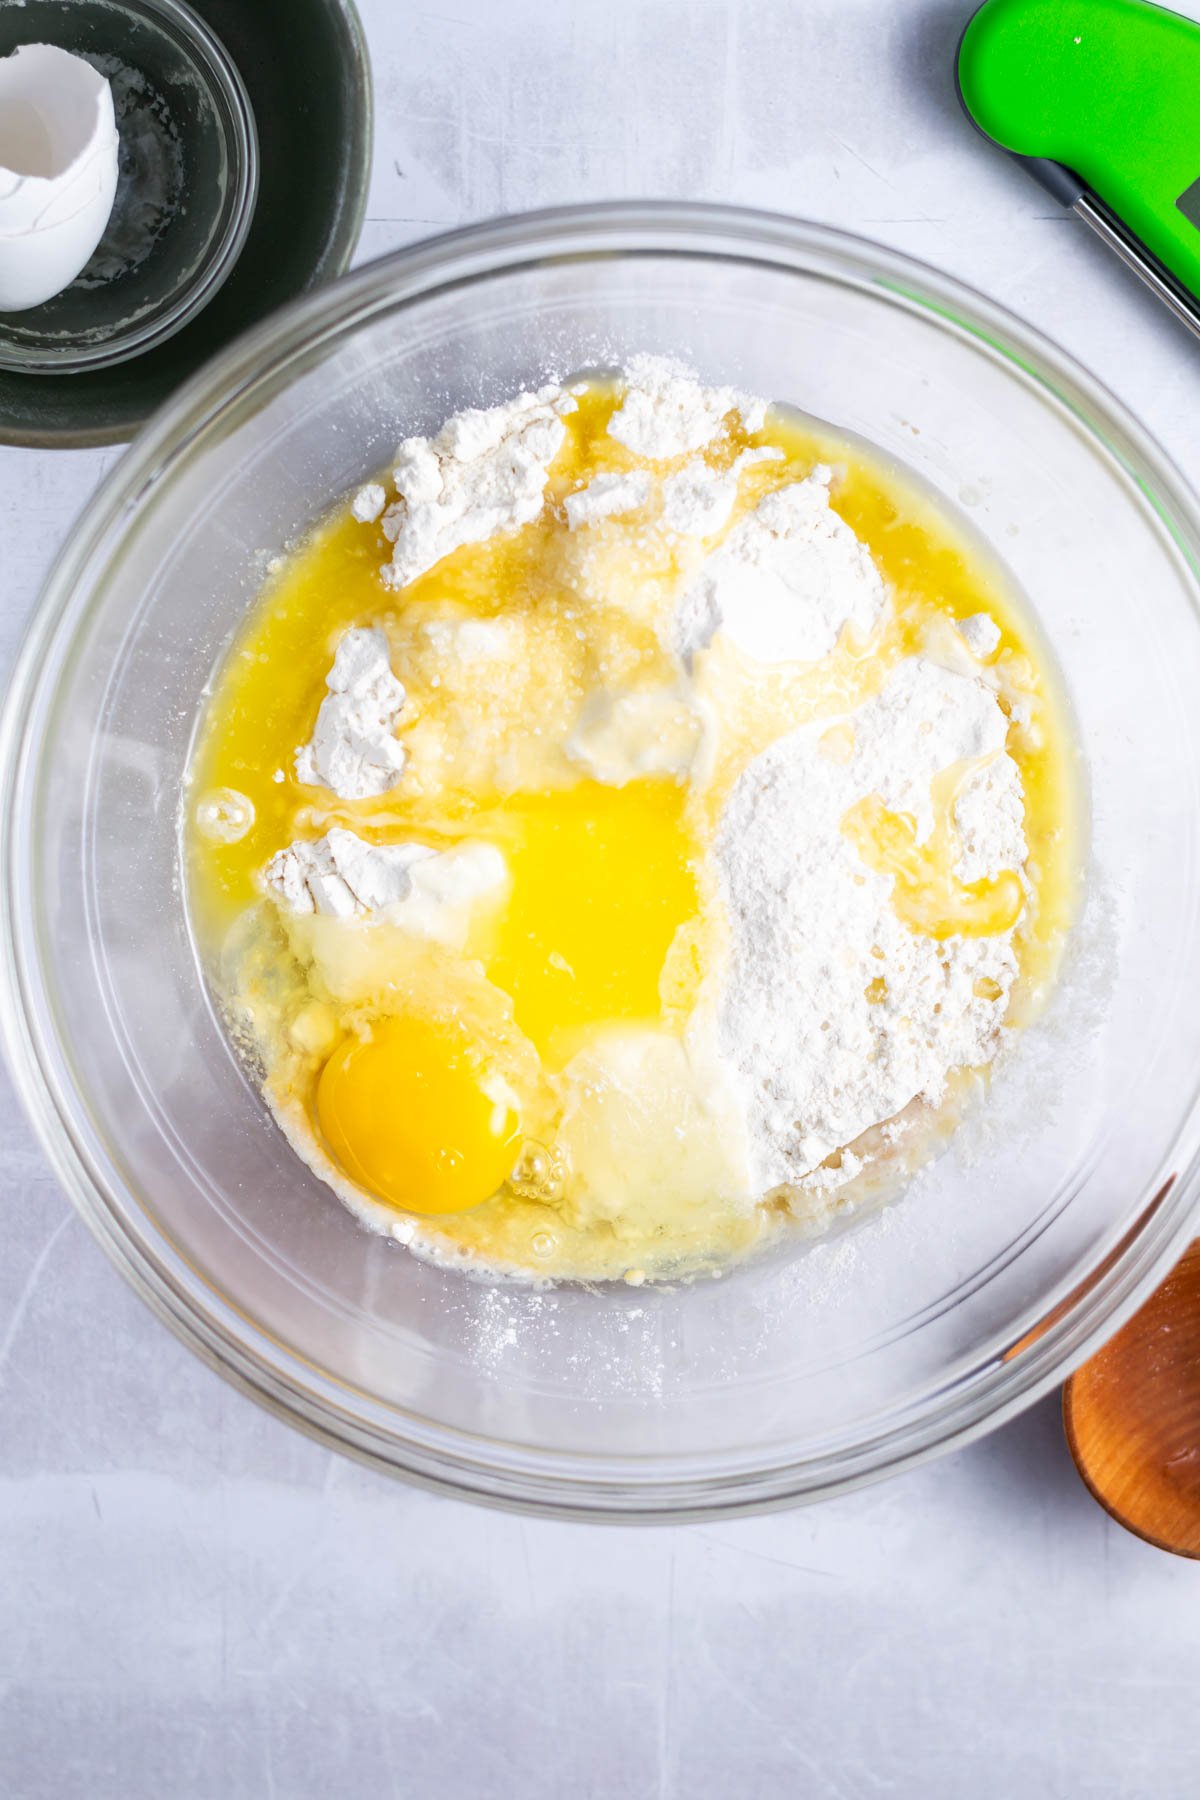 melted butter, egg and flour added to yeast mixture in a bowl